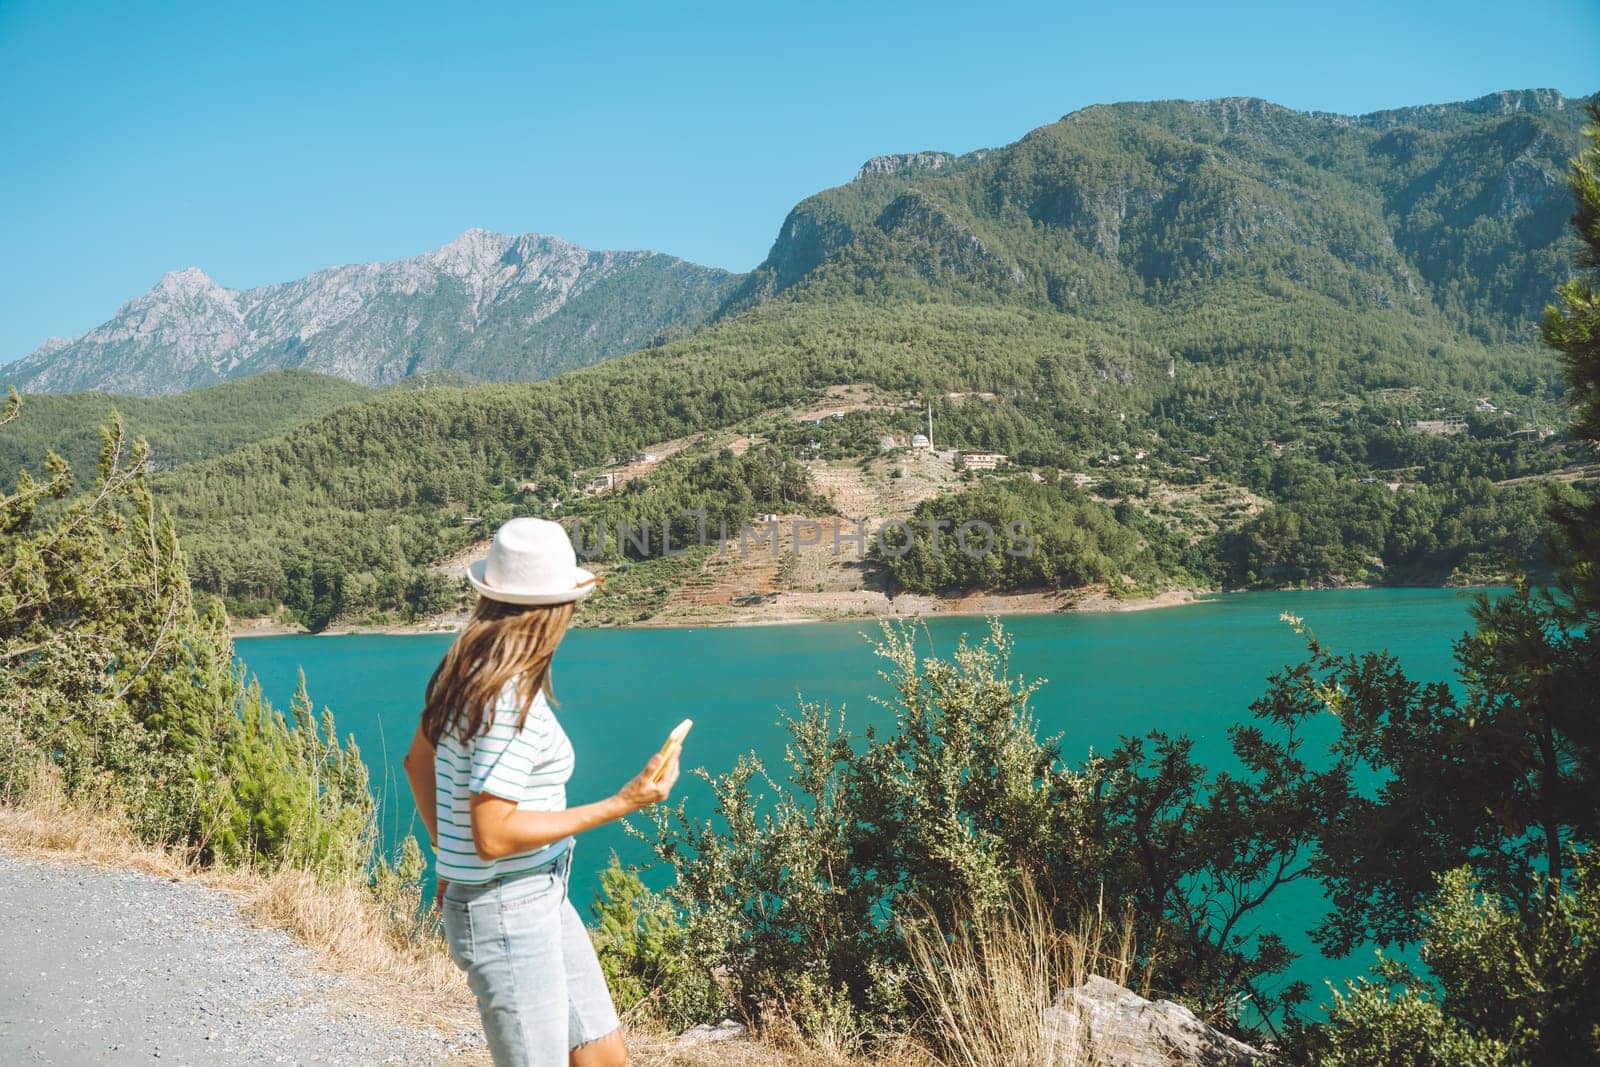 Smiling woman in hat and sunglasses with wild hair standing near mountains lake on background. Positive young woman traveling on blue lake outdoors travel adventure vacation.